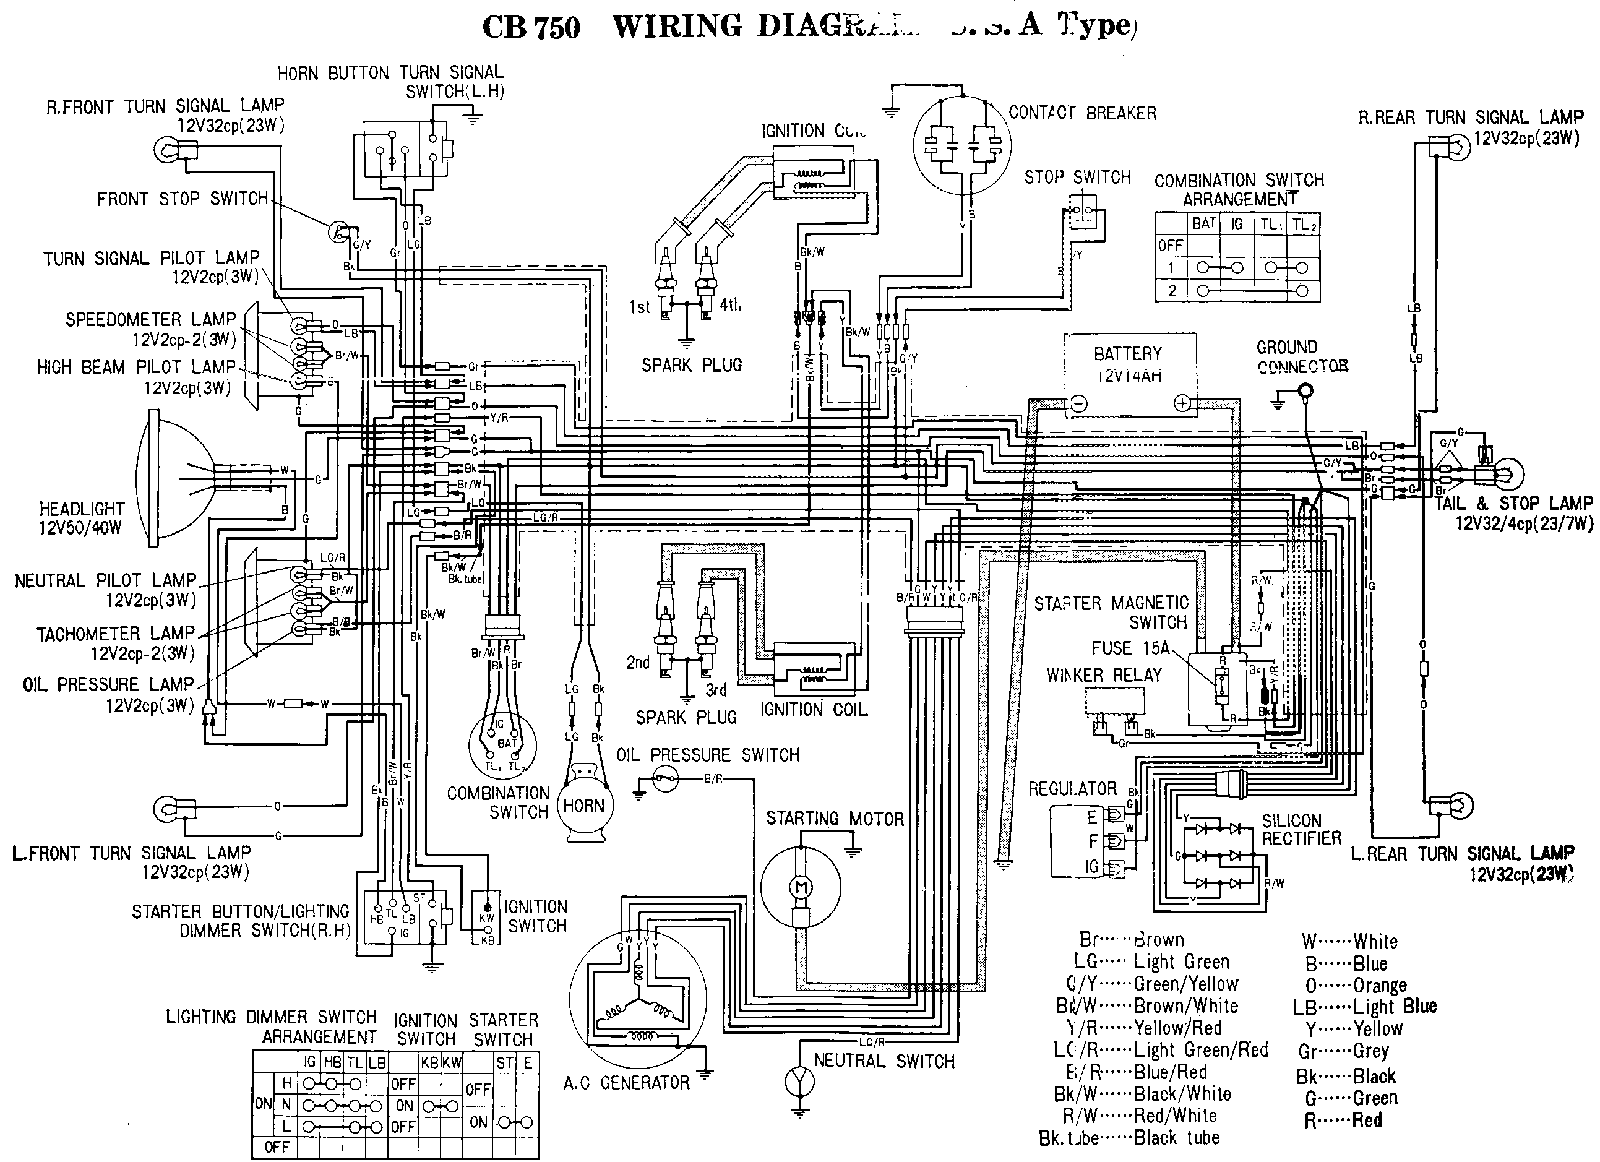 Picture 6 of 6 from Honda CB750 Wiring Diagrams 1998 ezgo ignition switch wiring diagram 